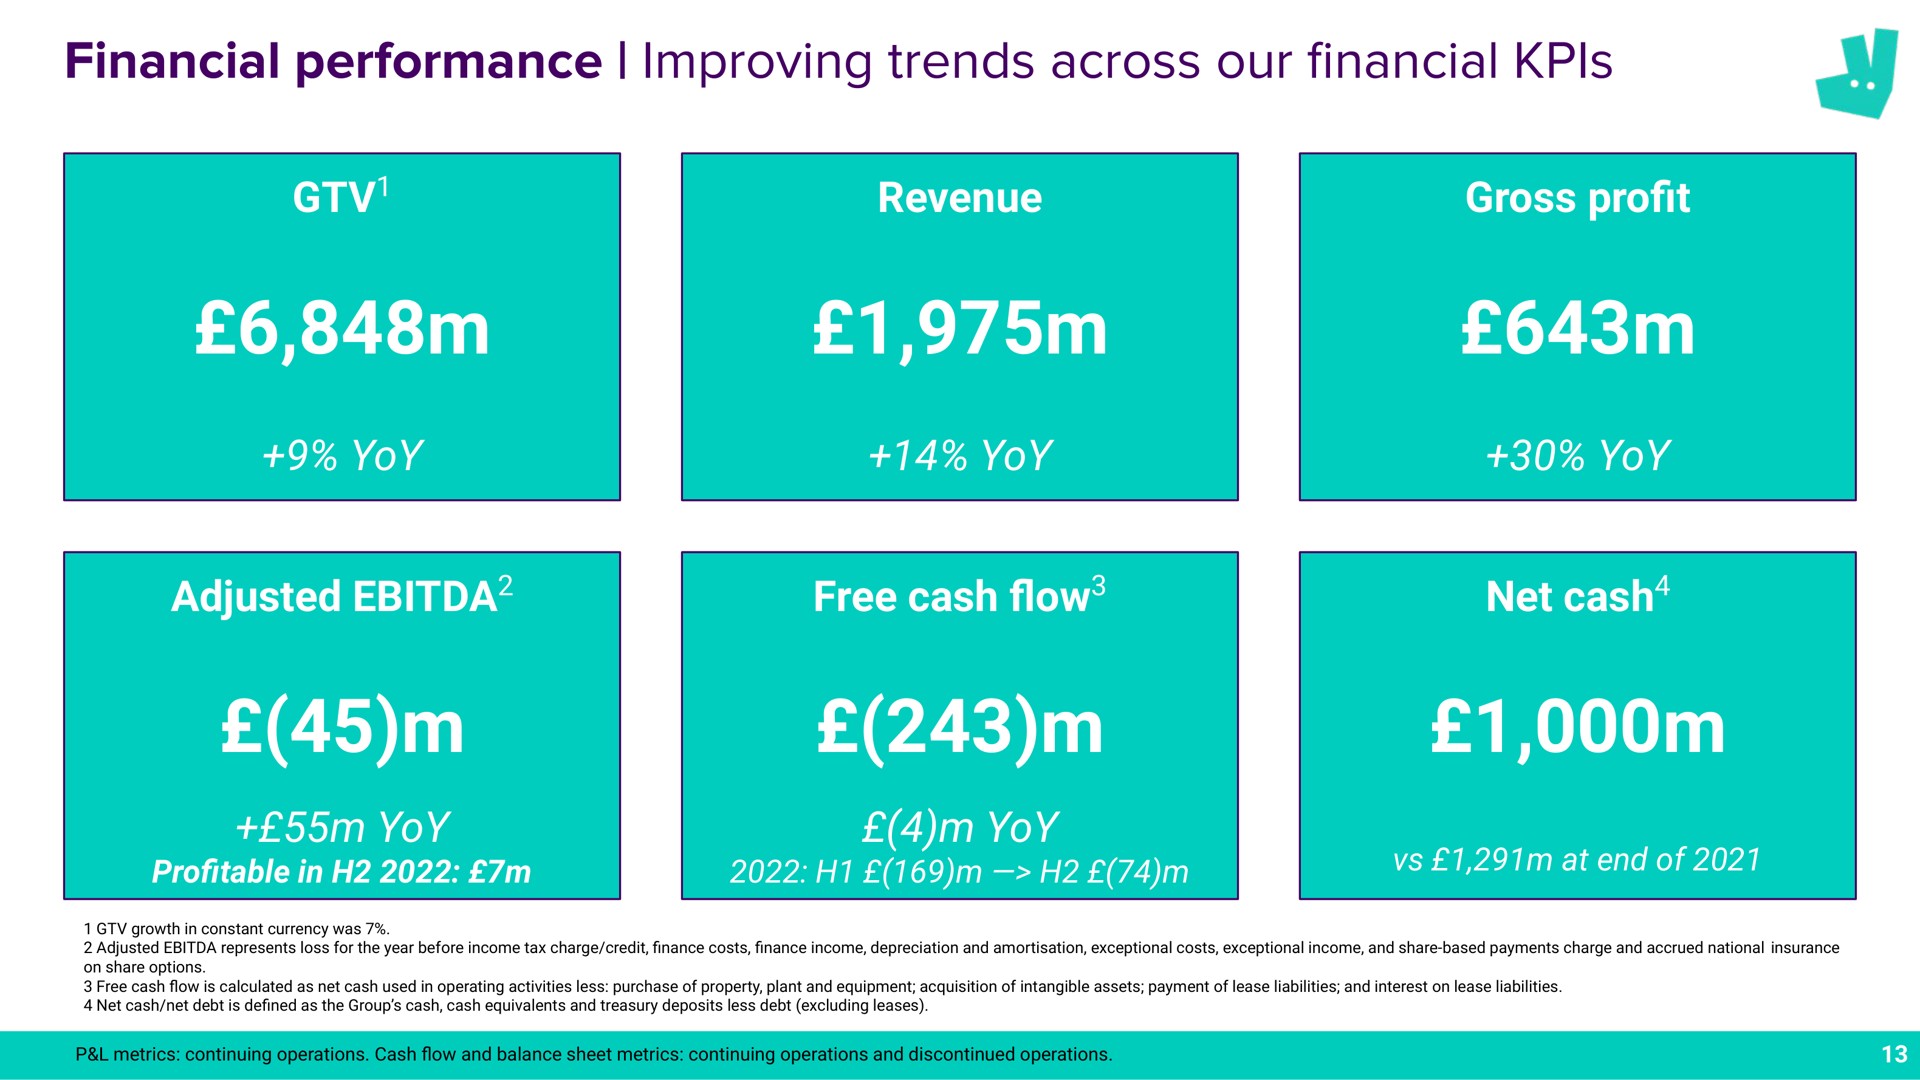 financial performance improving trends across our a some an gross profit free cash flow adjusted yoy yoy reel pups pam at end of net cash | Deliveroo